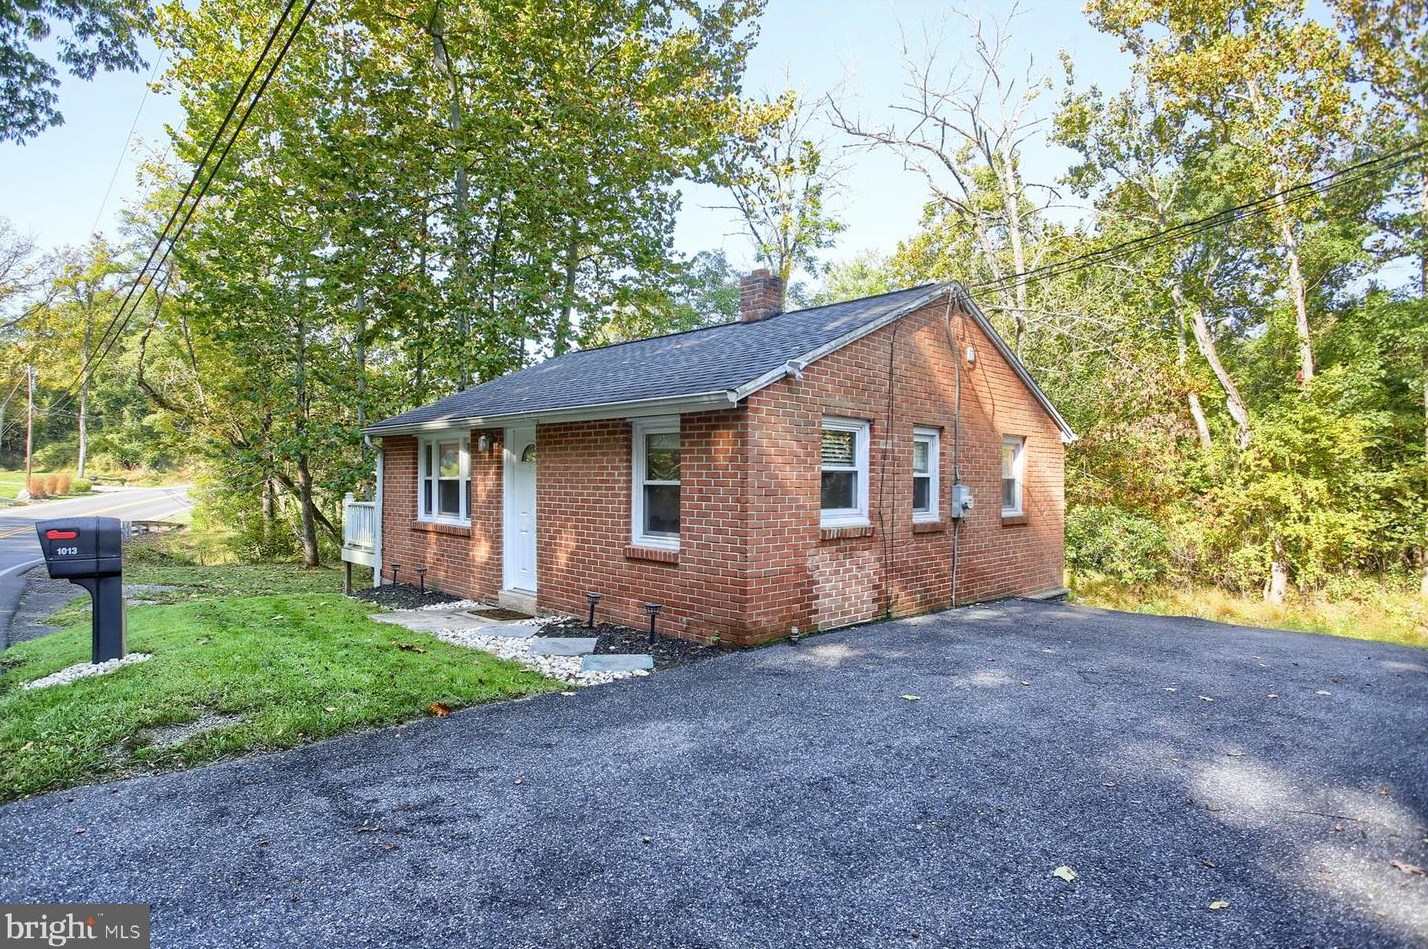 1013 Old Forge Rd, Rudytown, PA 17070